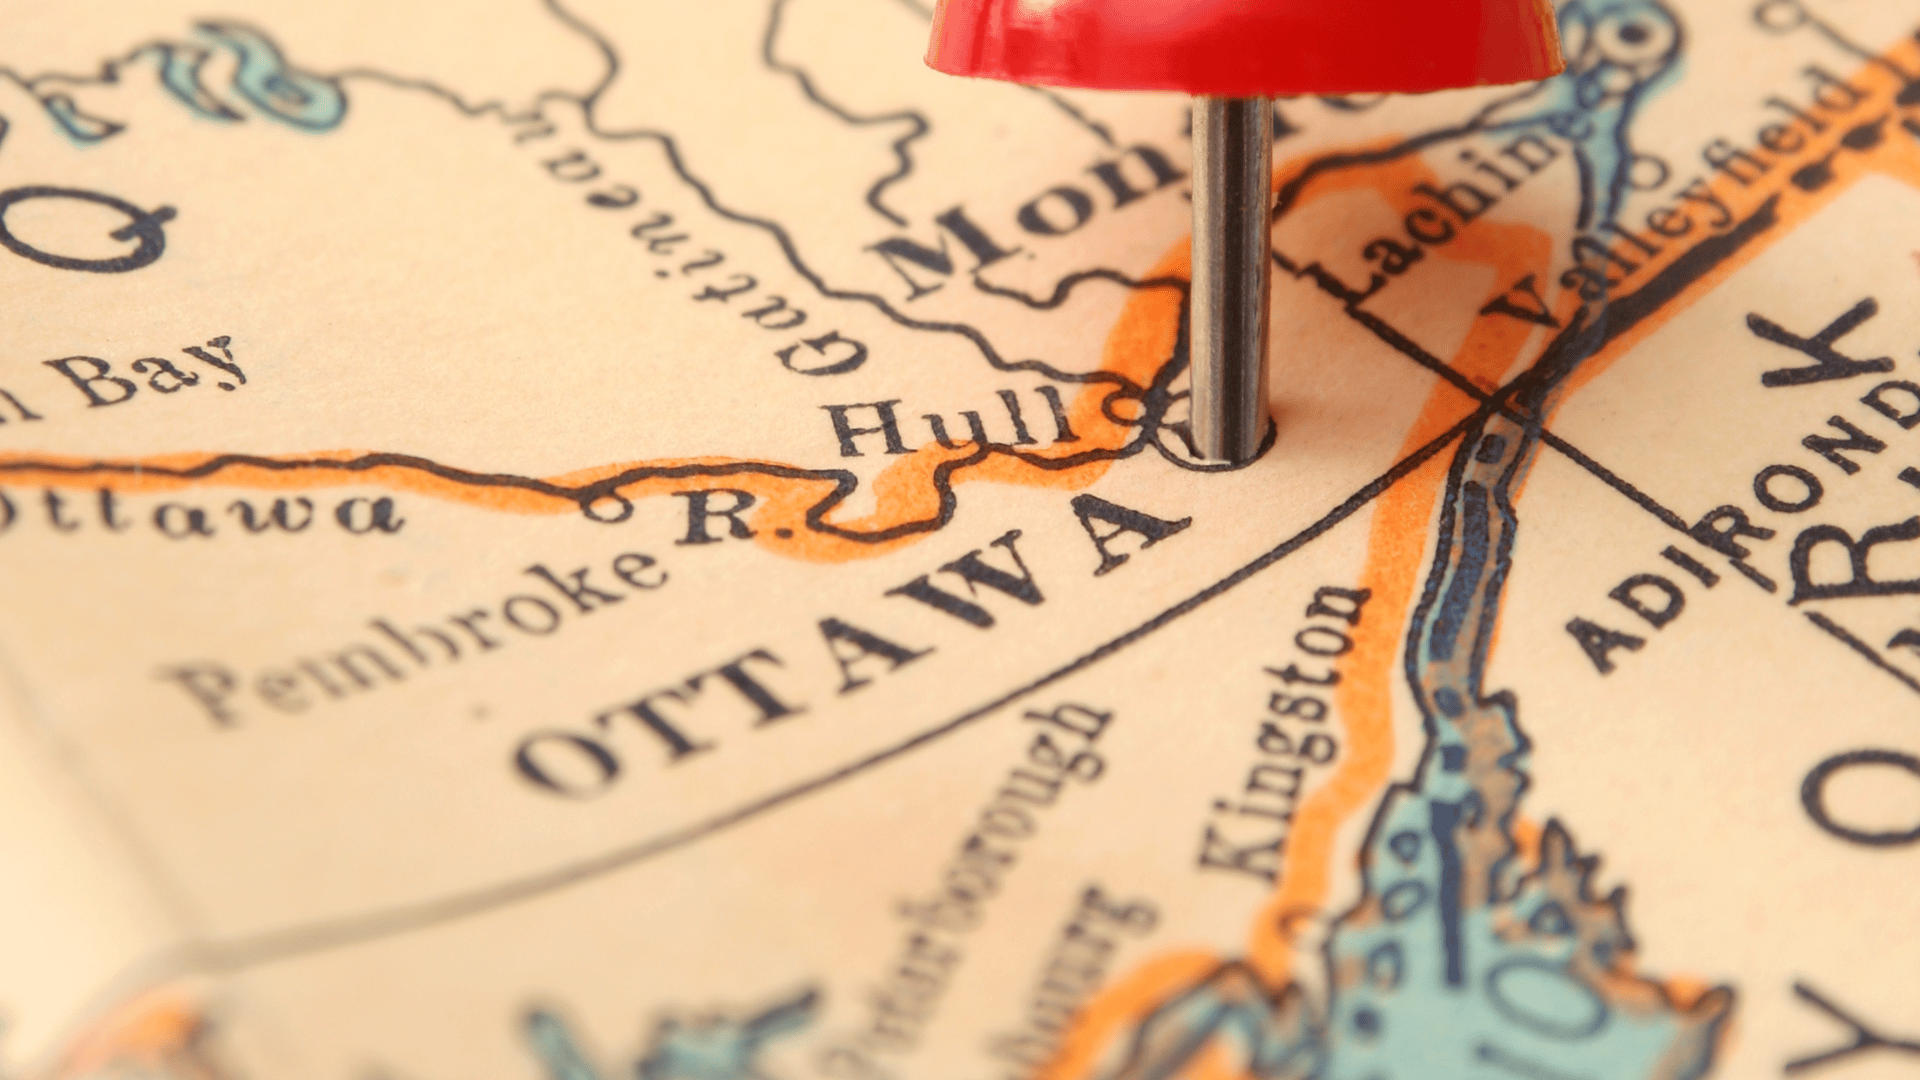 An image of a map of Ottawa Ontario